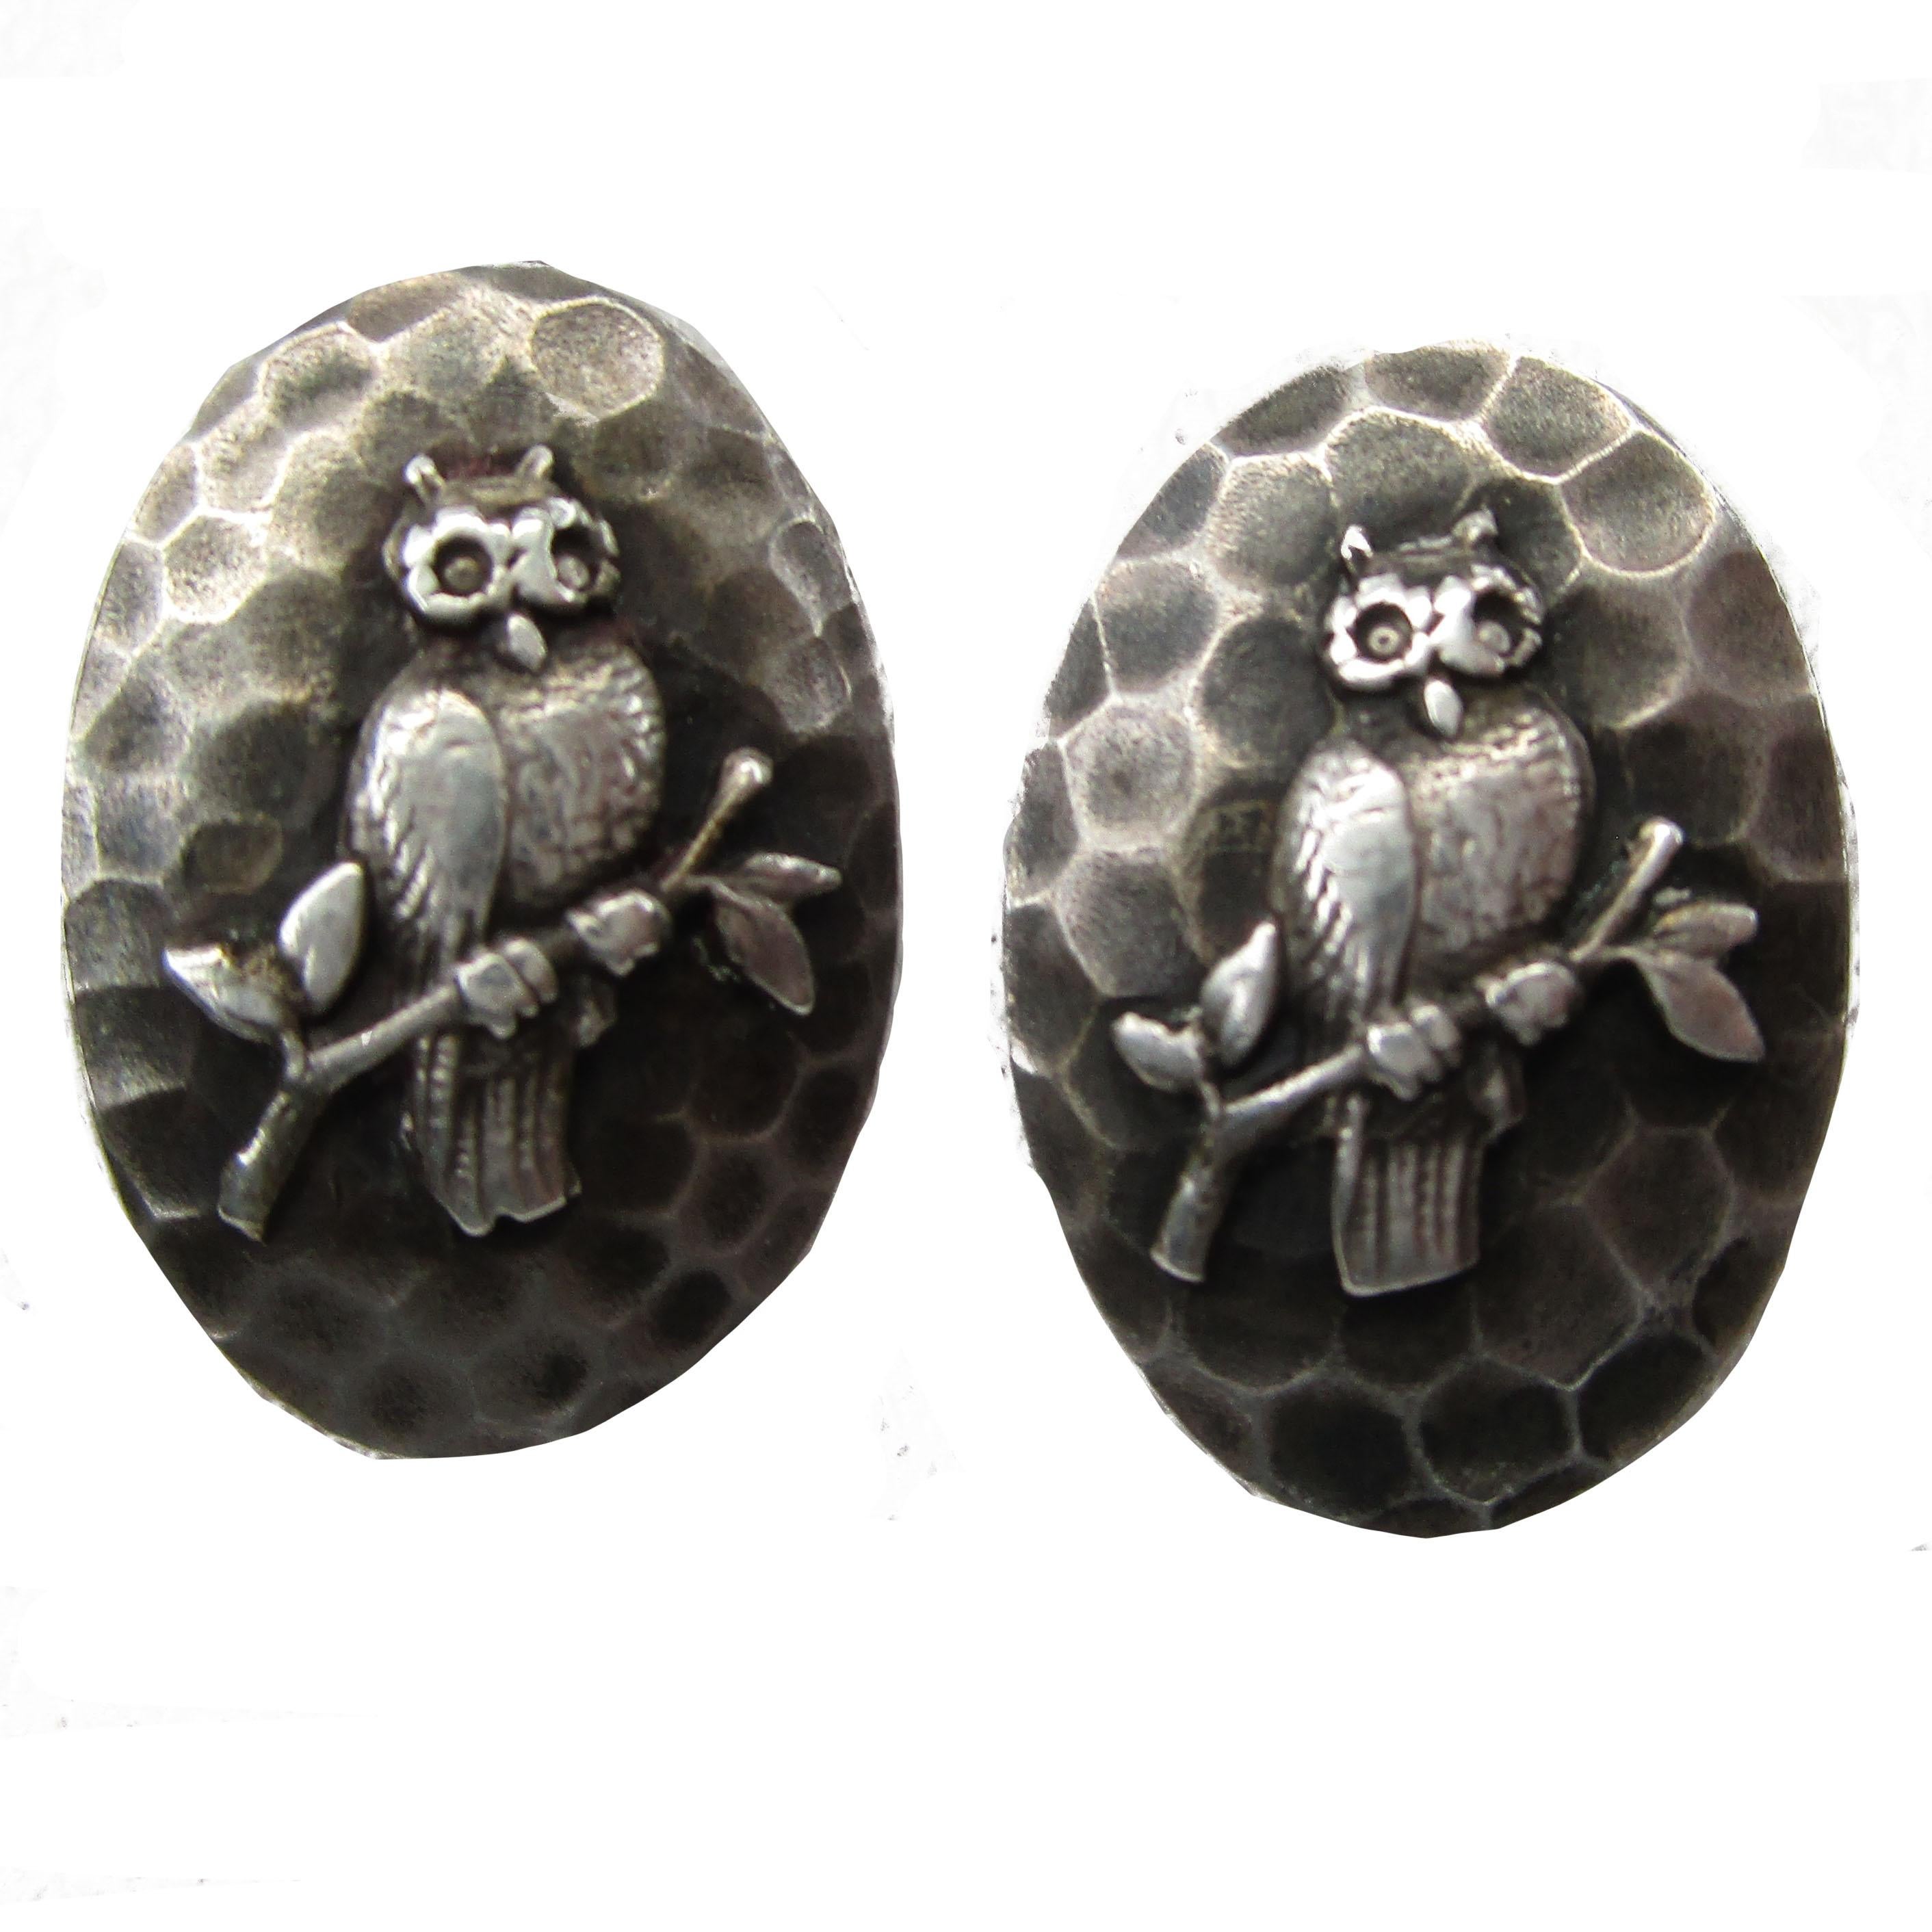 These cufflinks are the epitome of antique Victorian excellence. The hammered technique gives these cufflinks an intriguing texture that really makes the owl and beetle designs stand out! These links are in near mint condition! These would make the